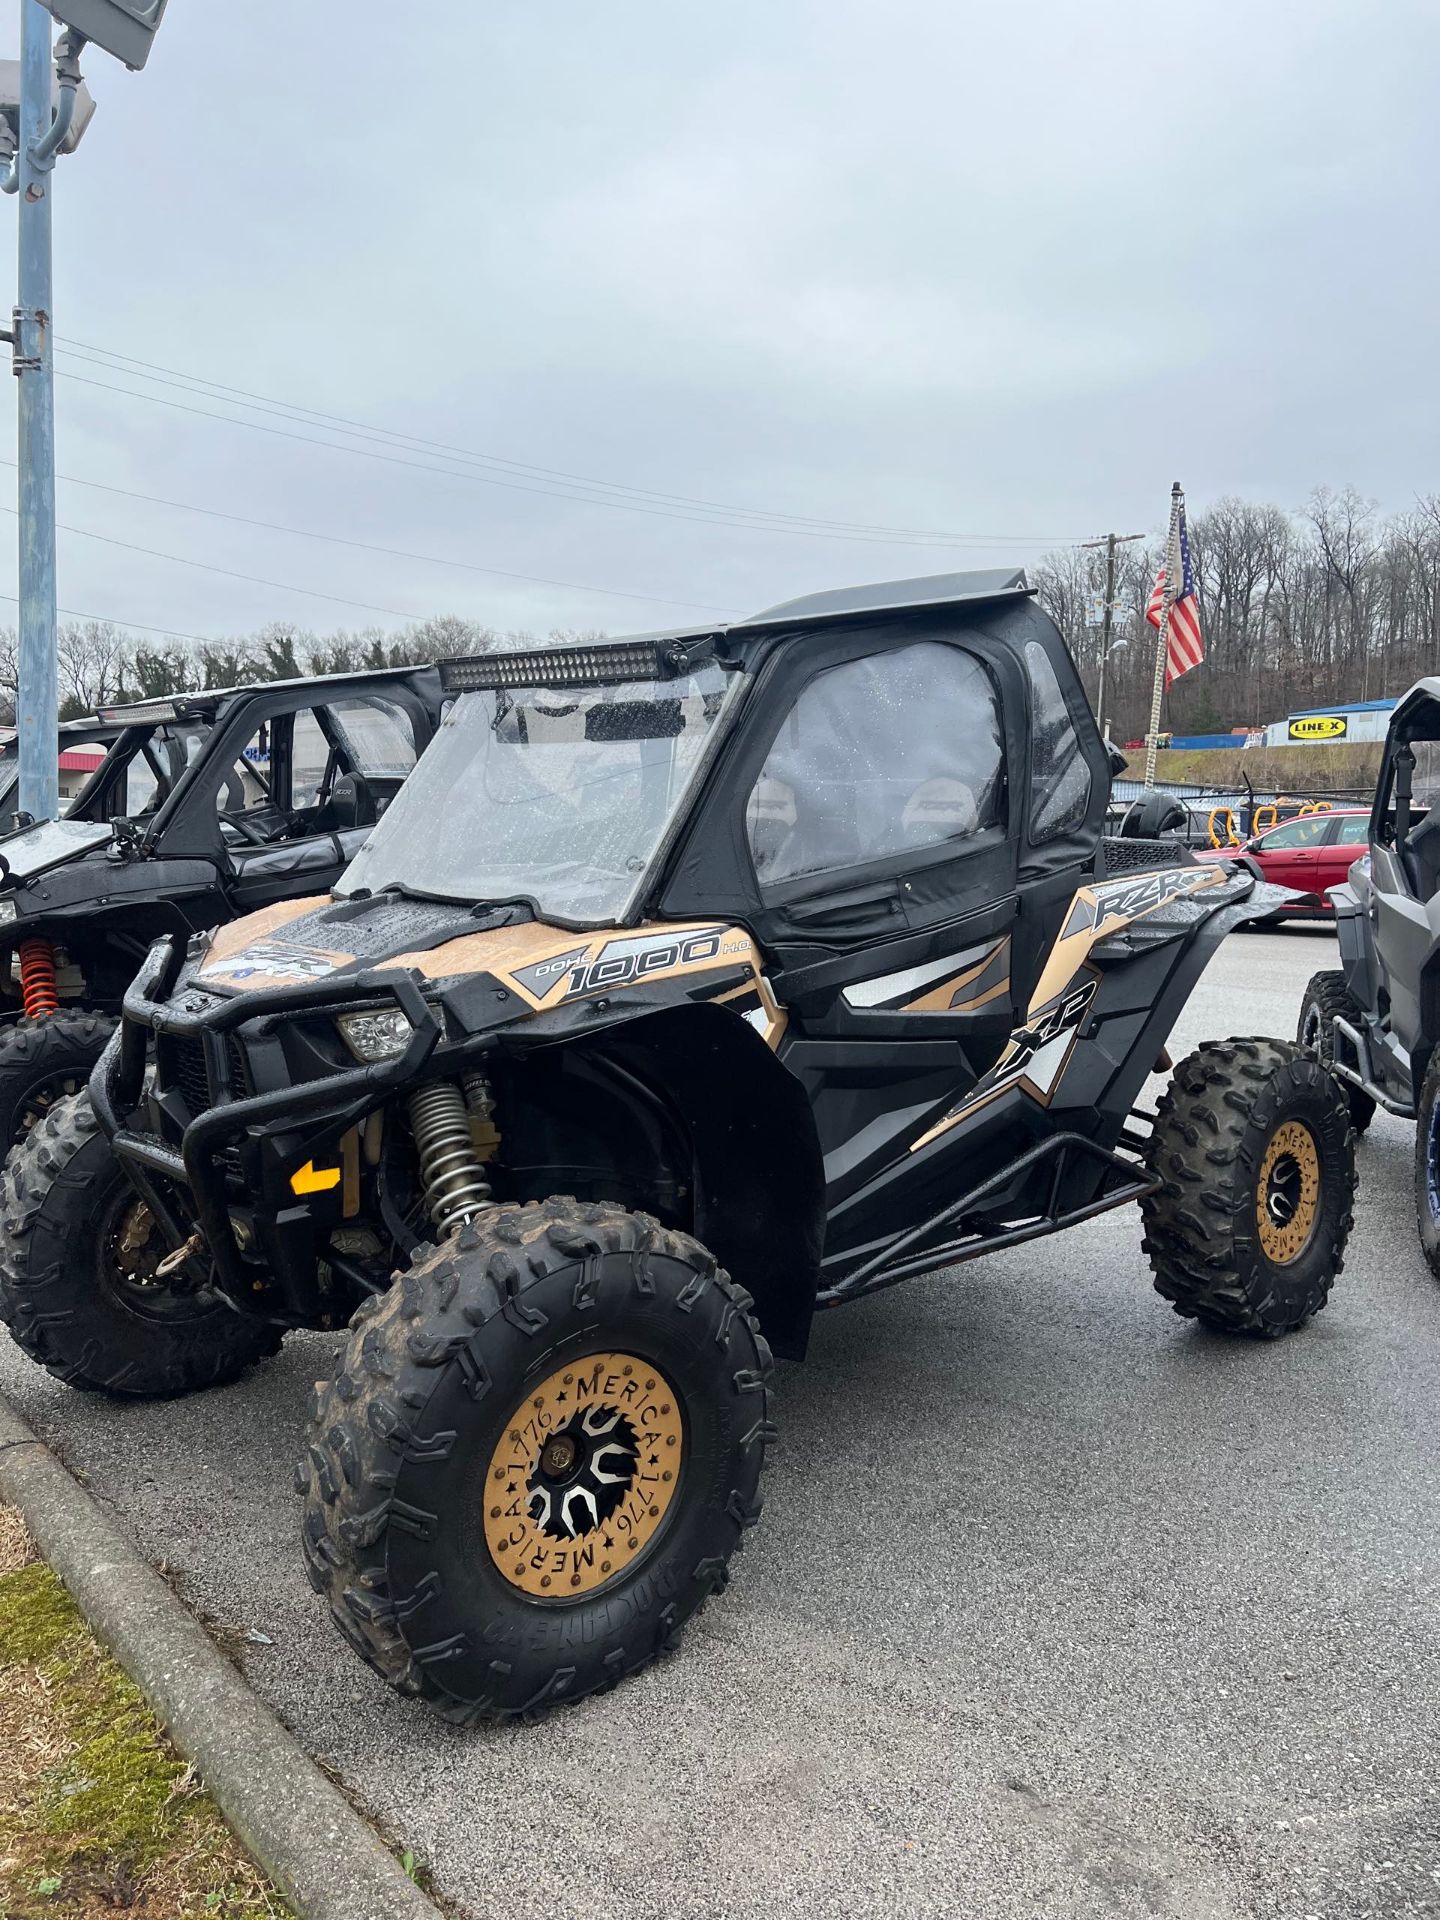 2017 Polaris RZR XP 1000 EPS in Knoxville, Tennessee - Photo 1